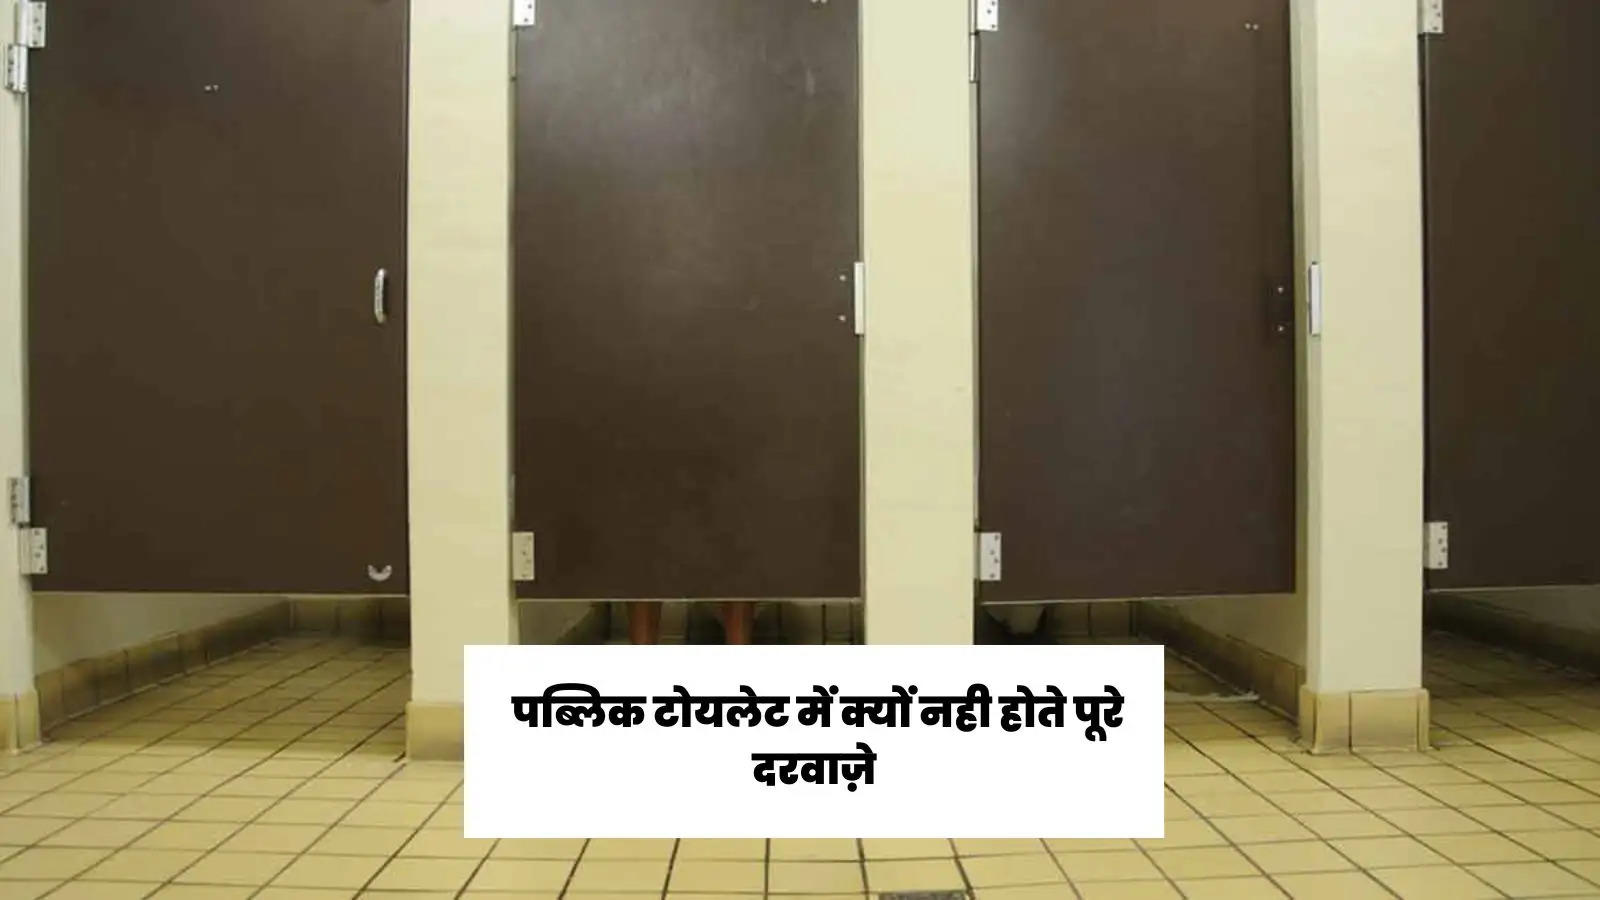 do-you-know-why-the-doors-of-public-bathrooms-are-not-complete